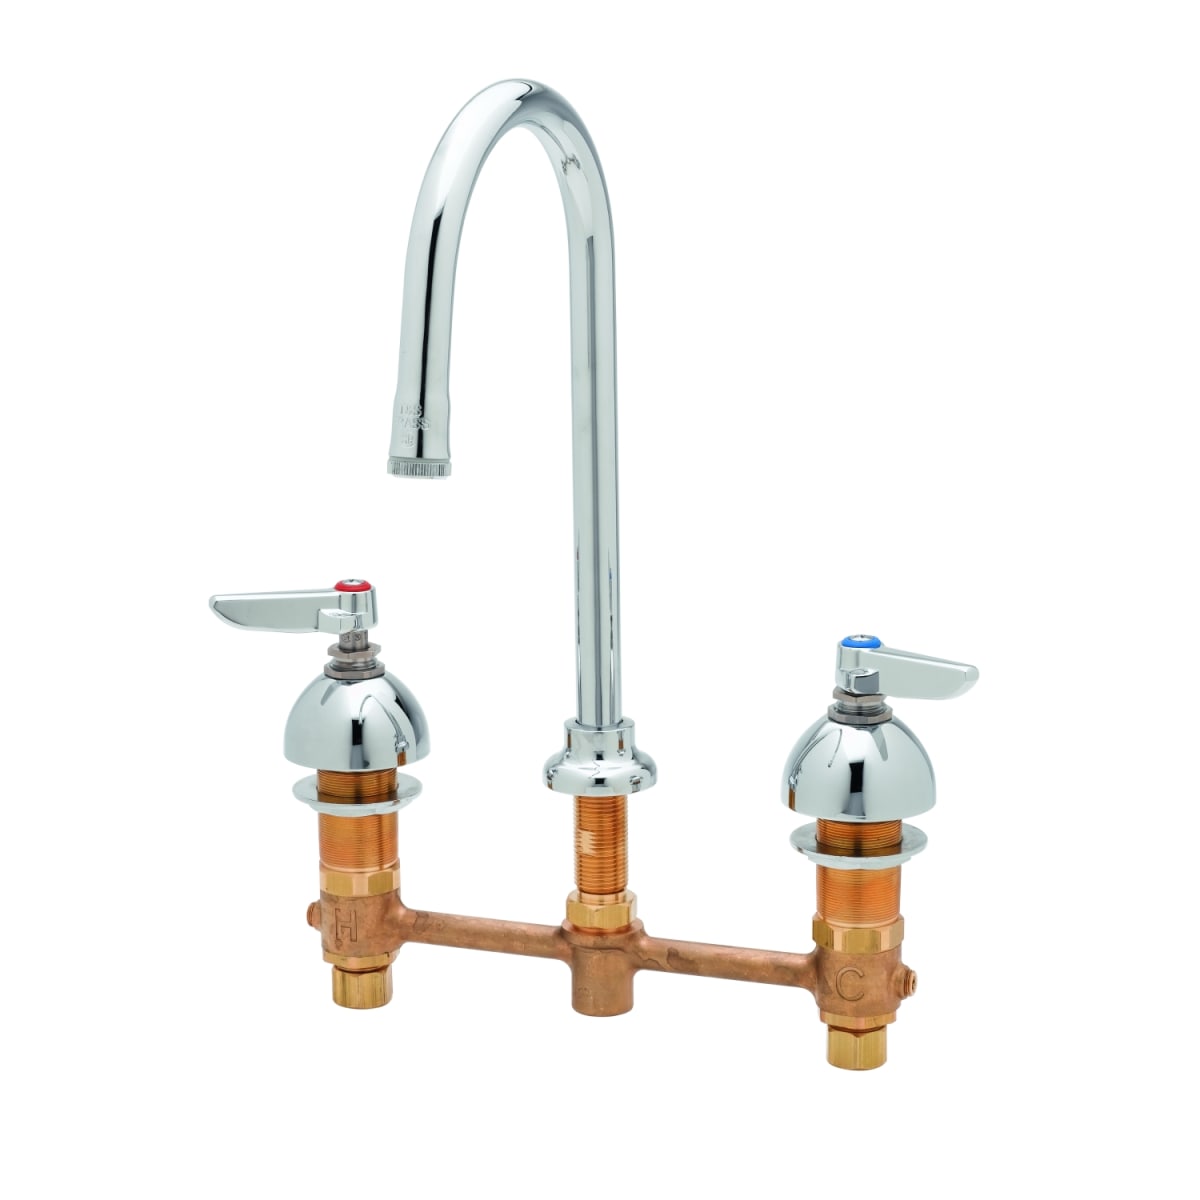 T and S Brass B-2850 Deck Mounted Lavatory Faucet with 8